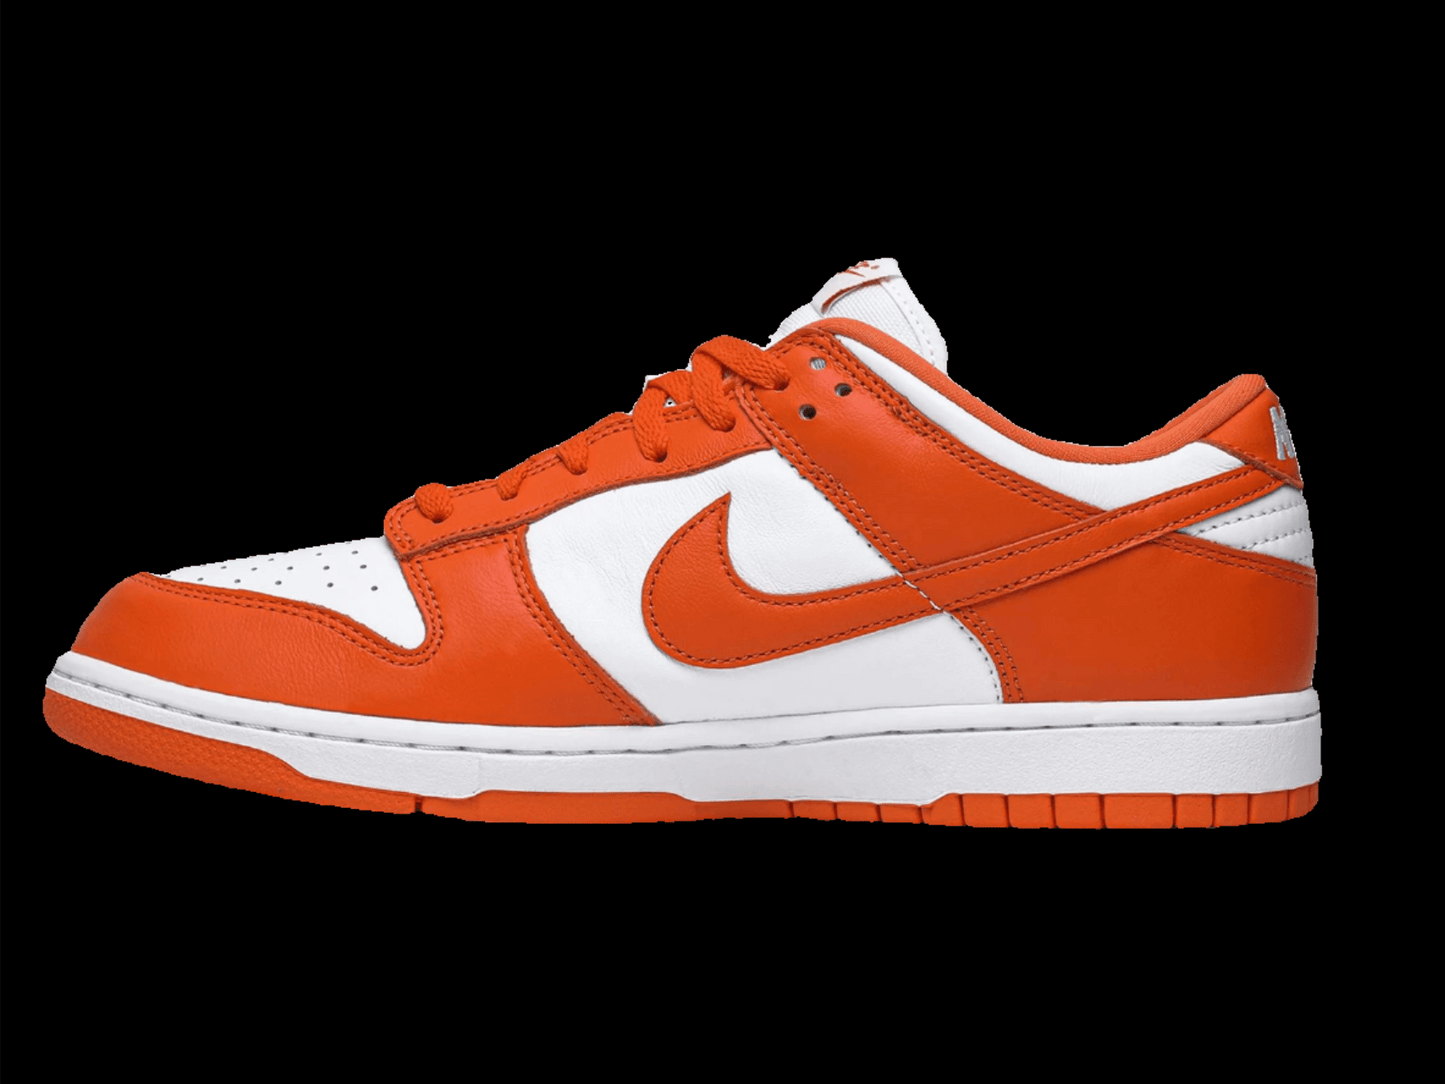 DUNK LOW RETRO SP 'SYRACUSE' - The Flaire